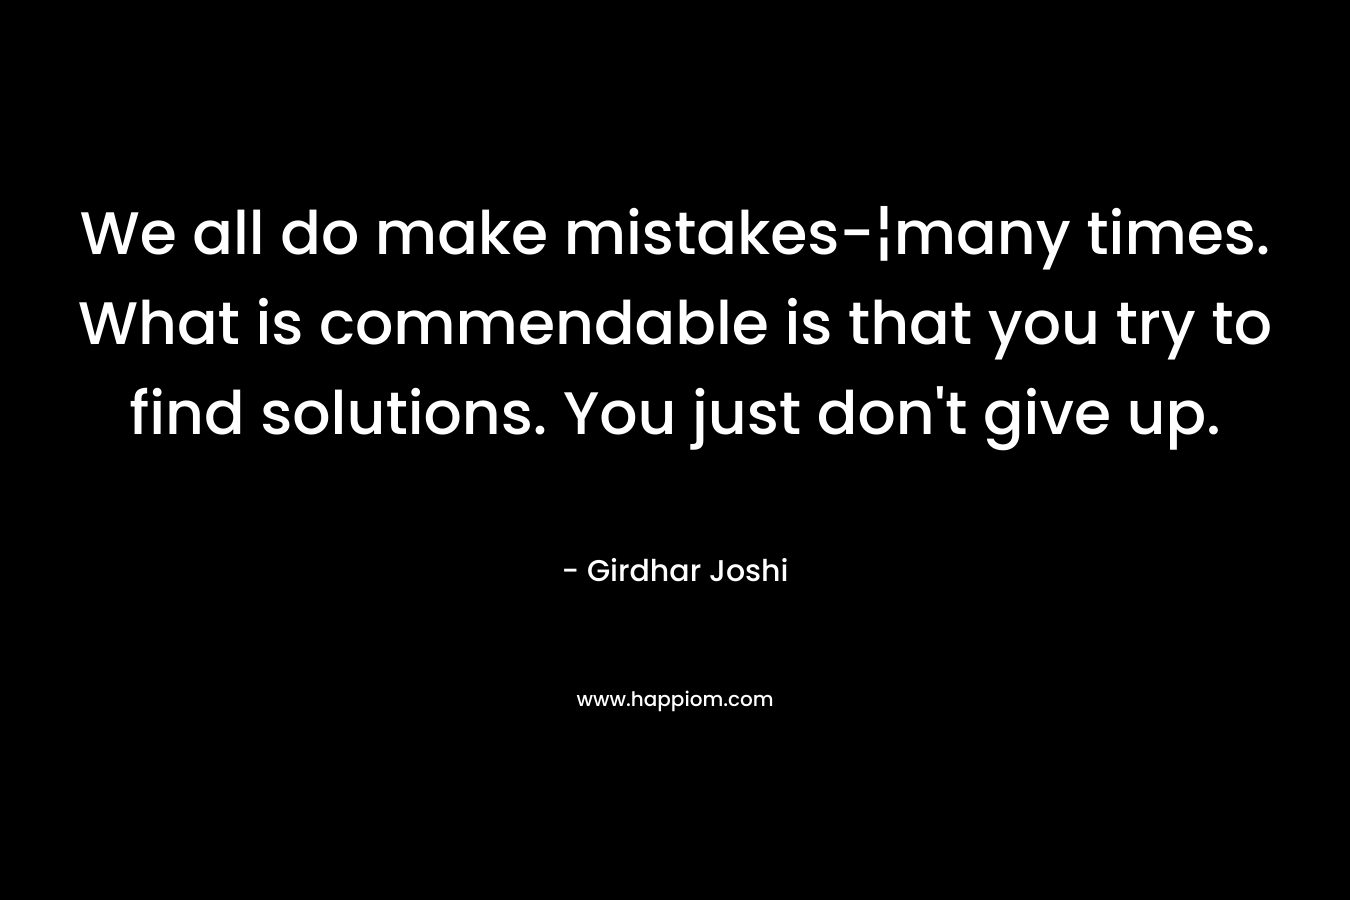 We all do make mistakes-¦many times. What is commendable is that you try to find solutions. You just don't give up.